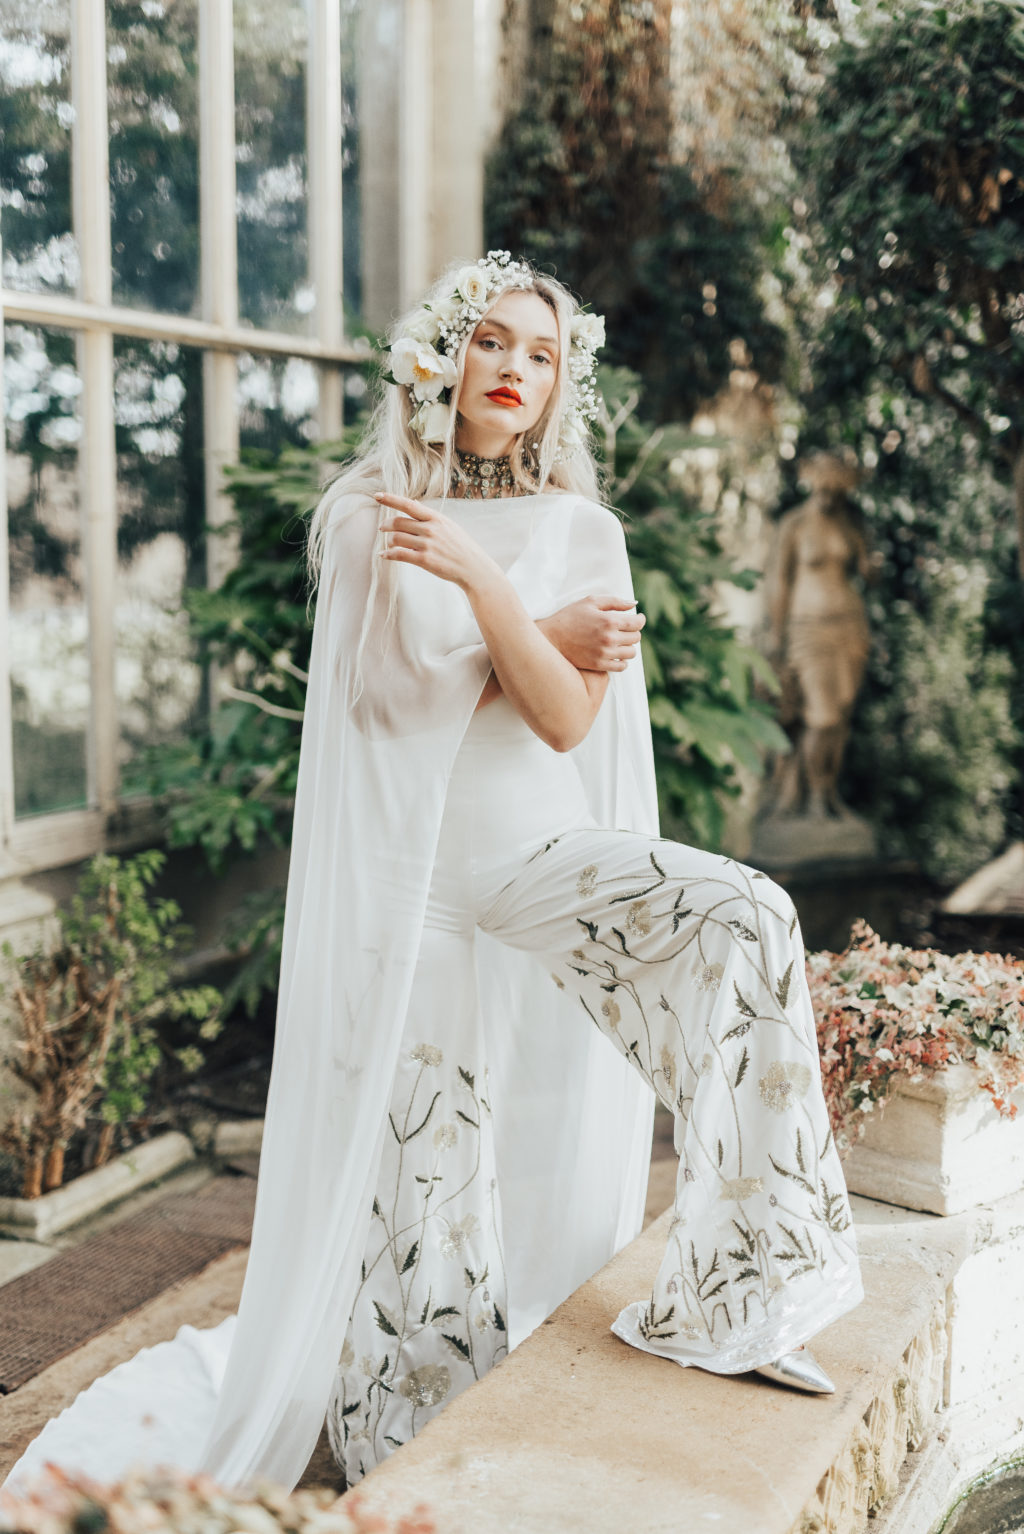 Ethical Wedding Dresses by Bowen Dryden: The 'Rebel Rose' Collection